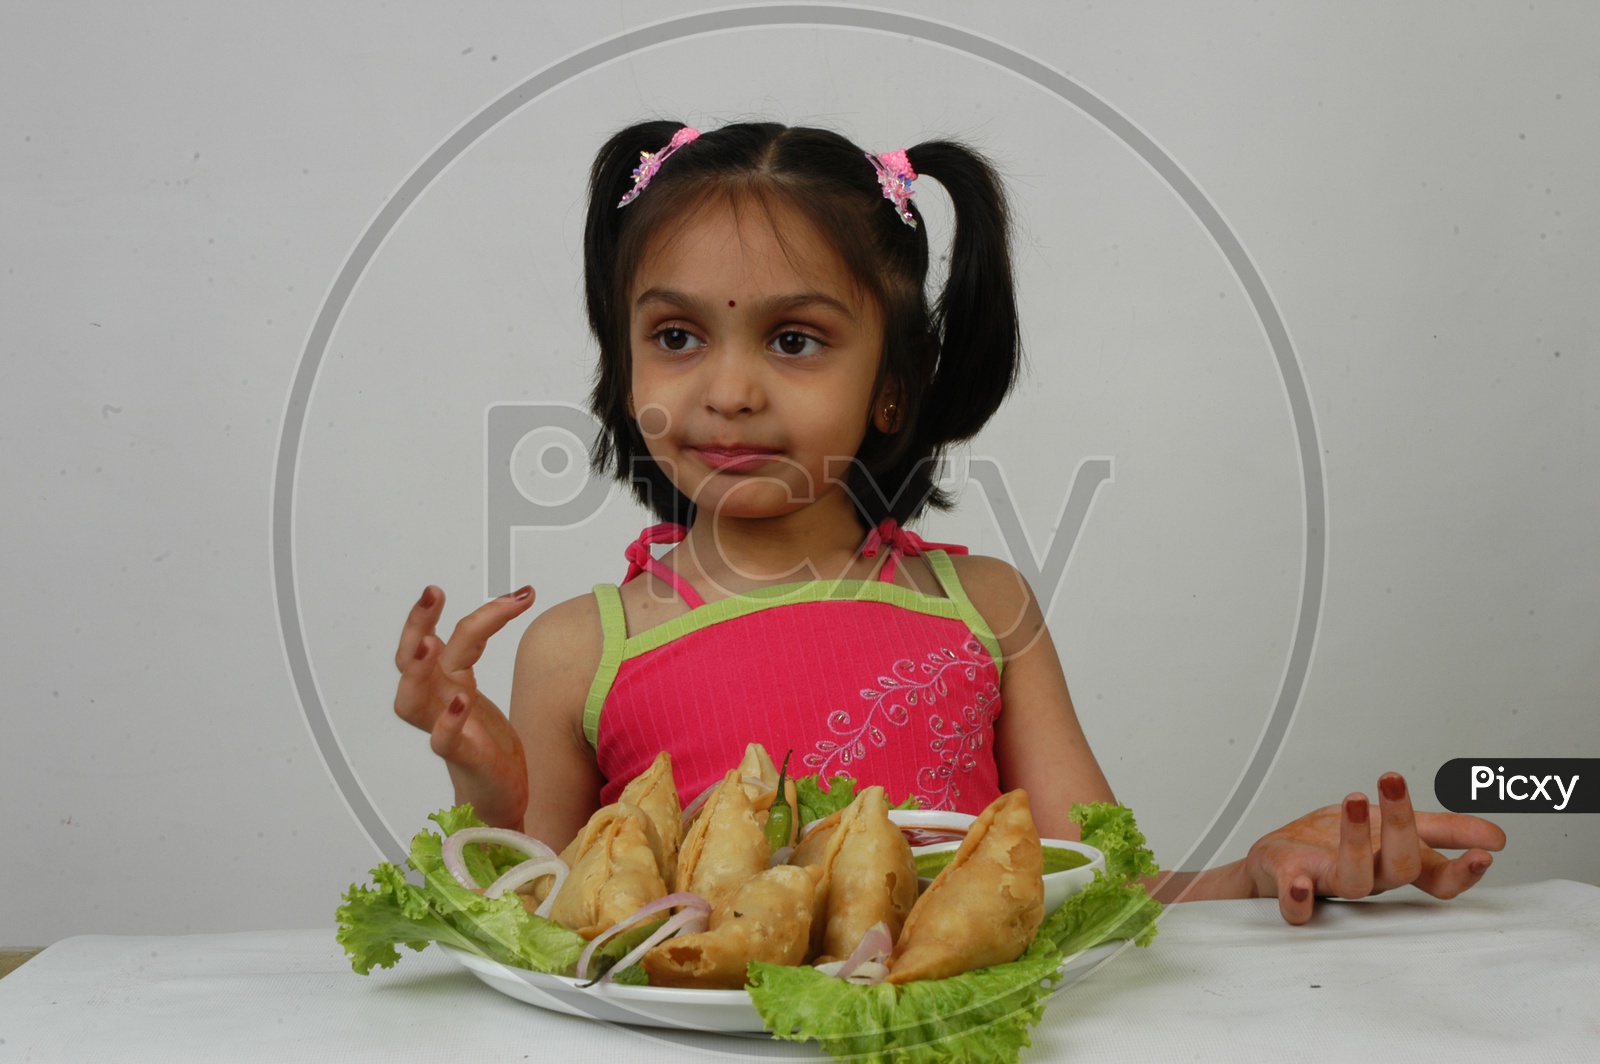 An Indian  Girl Kid At Samosas Plate With an Expression on an Isolated White Background